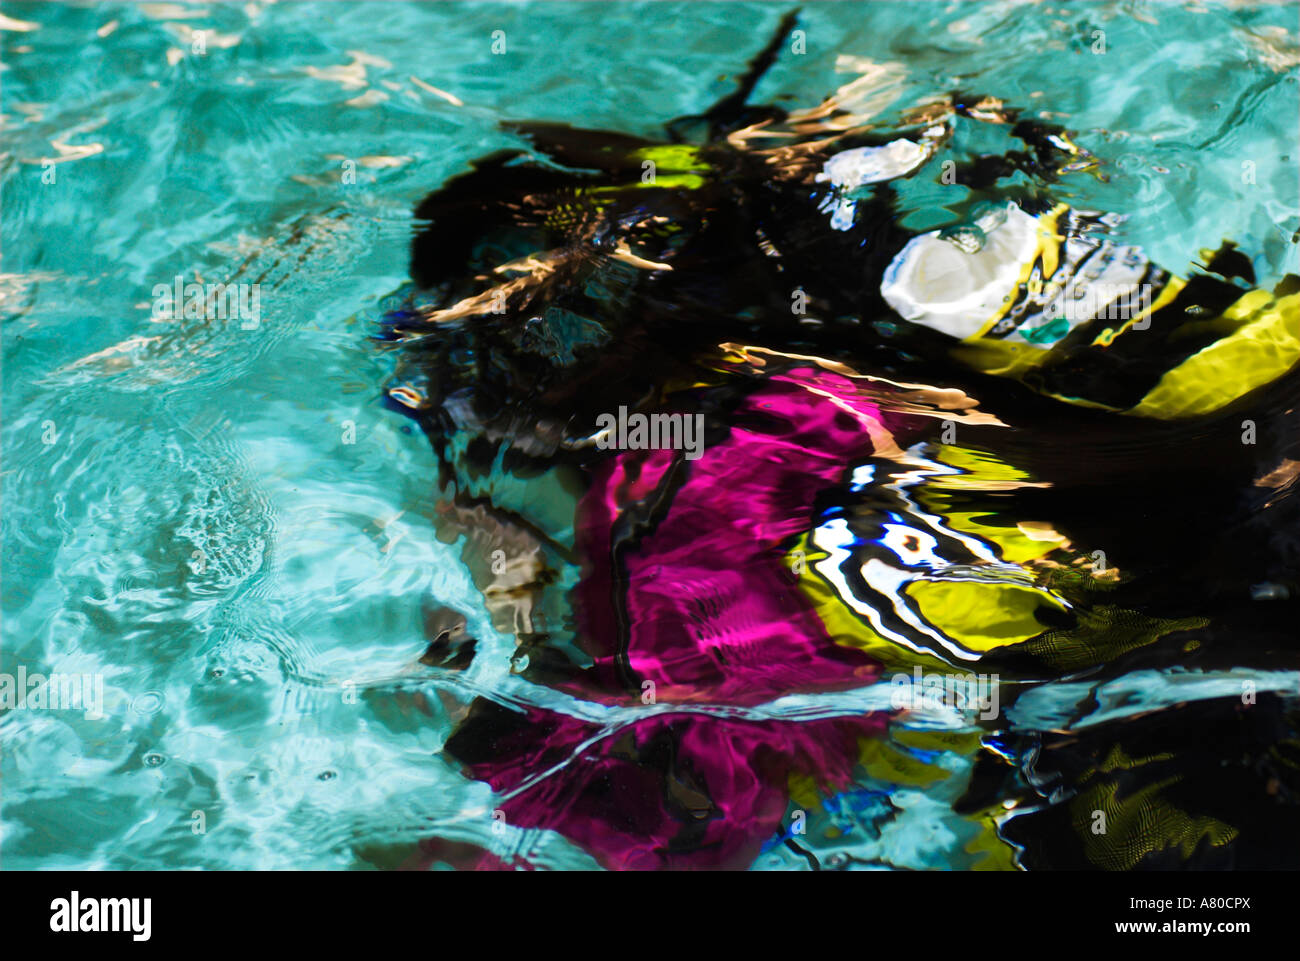 Abstract scuba diver with colourful drysuit swimming underwater in pool seen from surface Stock Photo